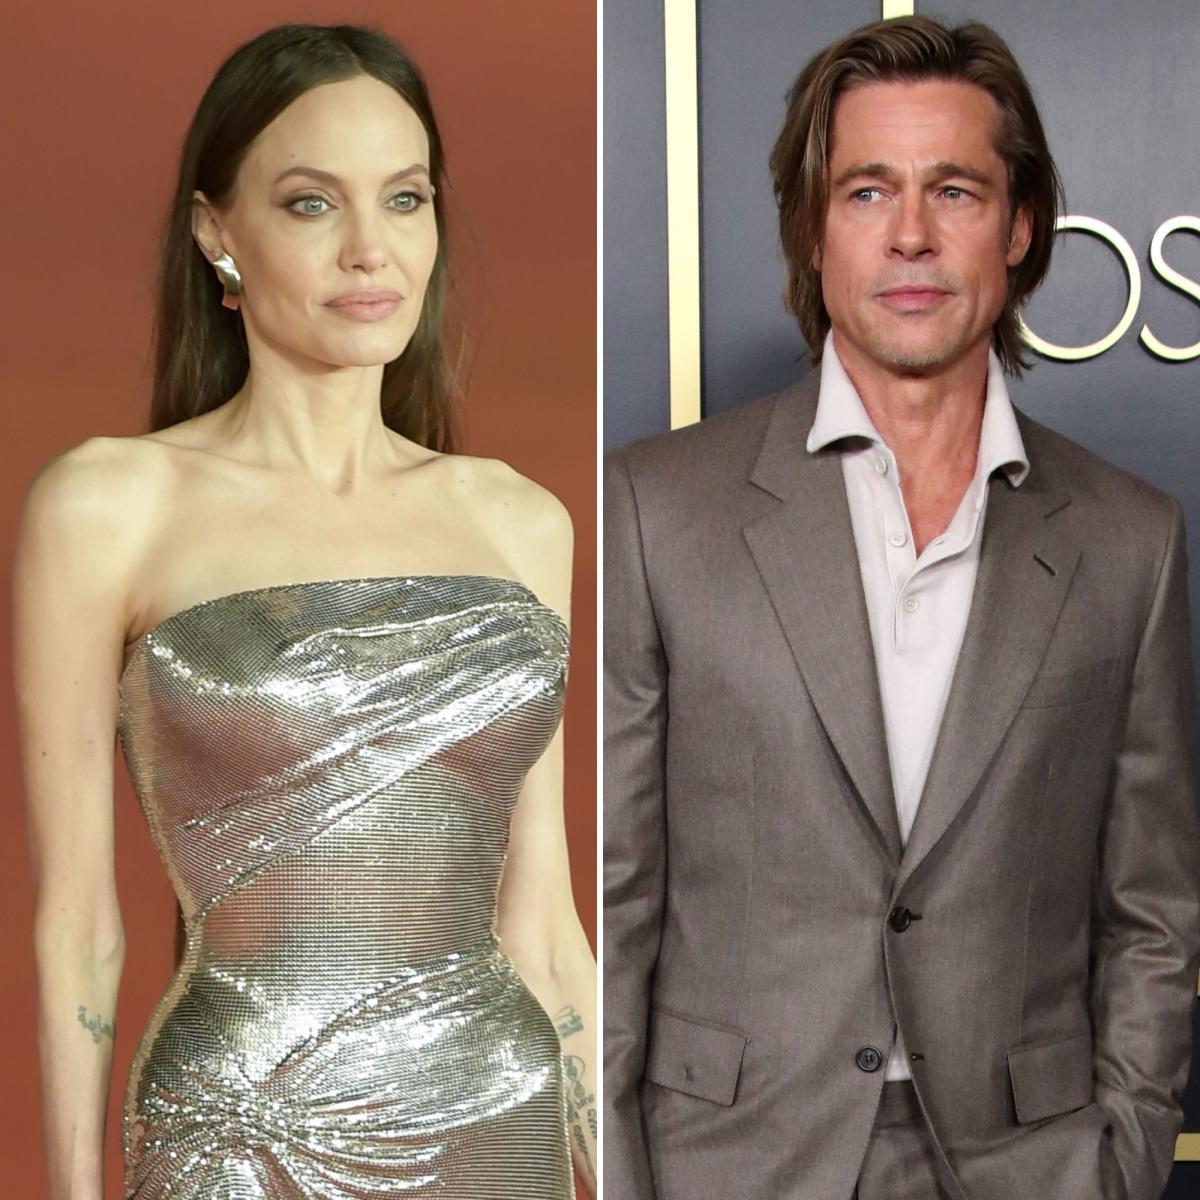 Brad Pitt dealt new blow in ongoing legal battle with ex Angelina Jolie 8  years after split